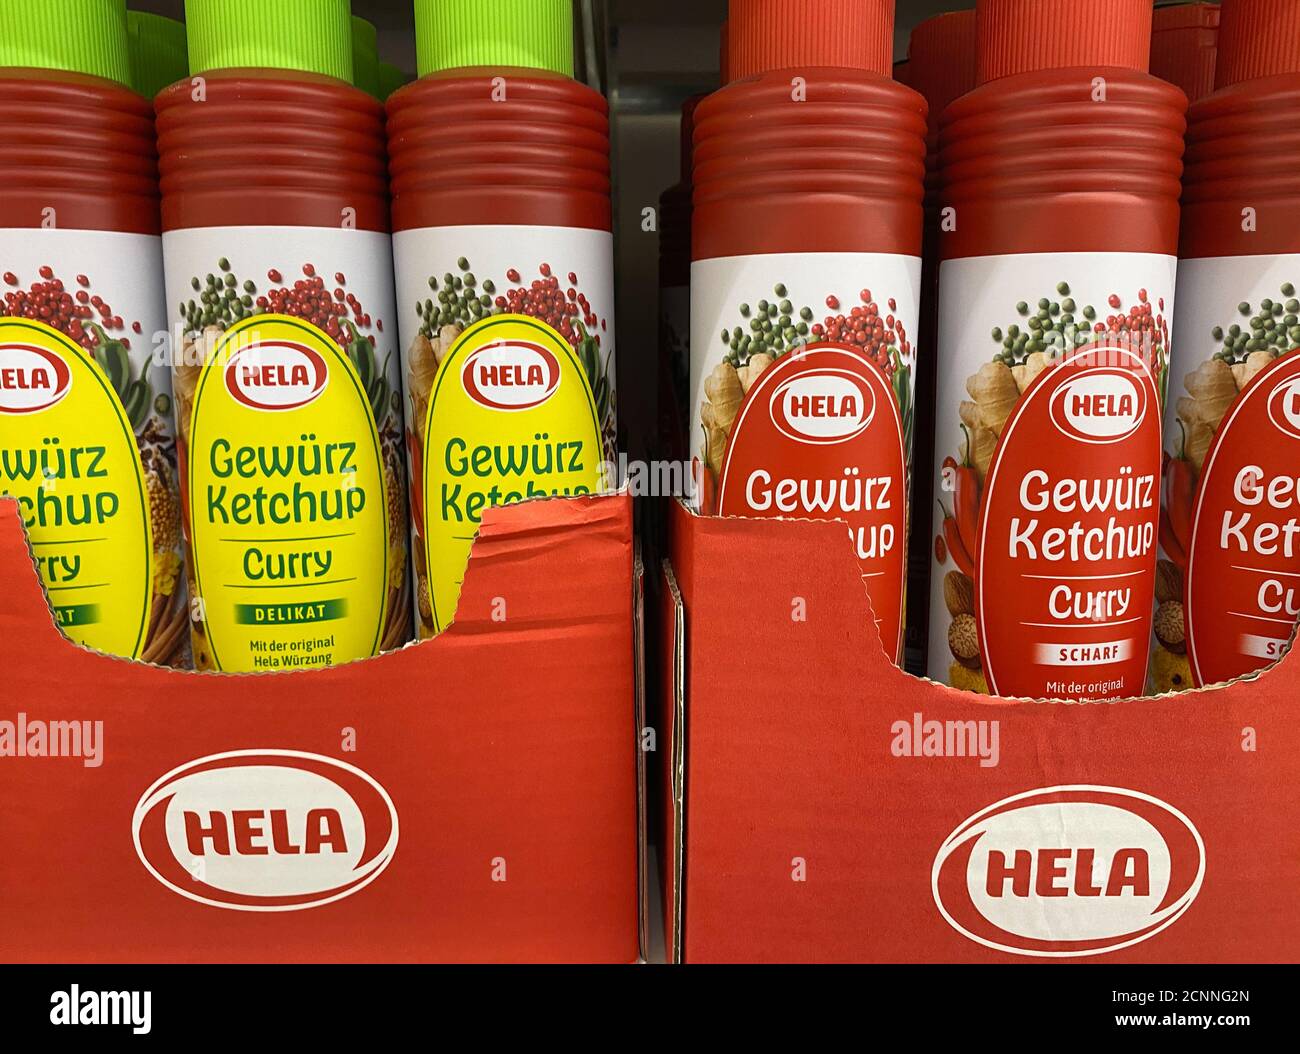 Viersen, Germany - August 9. 2020: View on bottles Hela curry ketchup sauce  in shelf of german supermarket (focus on central bottles Stock Photo - Alamy